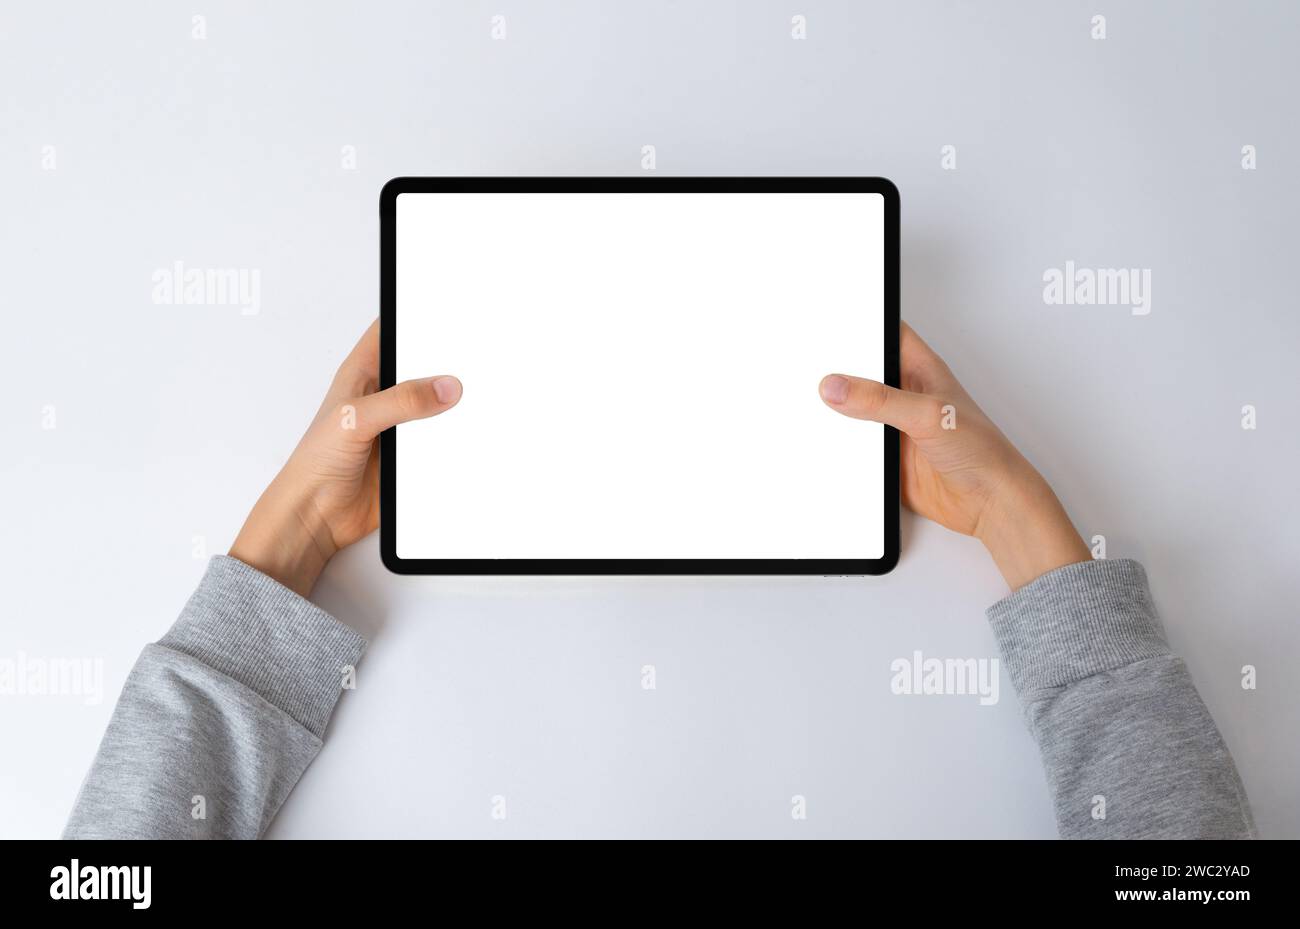 Top view of a kid's hands holding a horizontal tablet on a desk. Flat lay composition with an isolated screen for mockup, perfect for showcasing inter Stock Photo